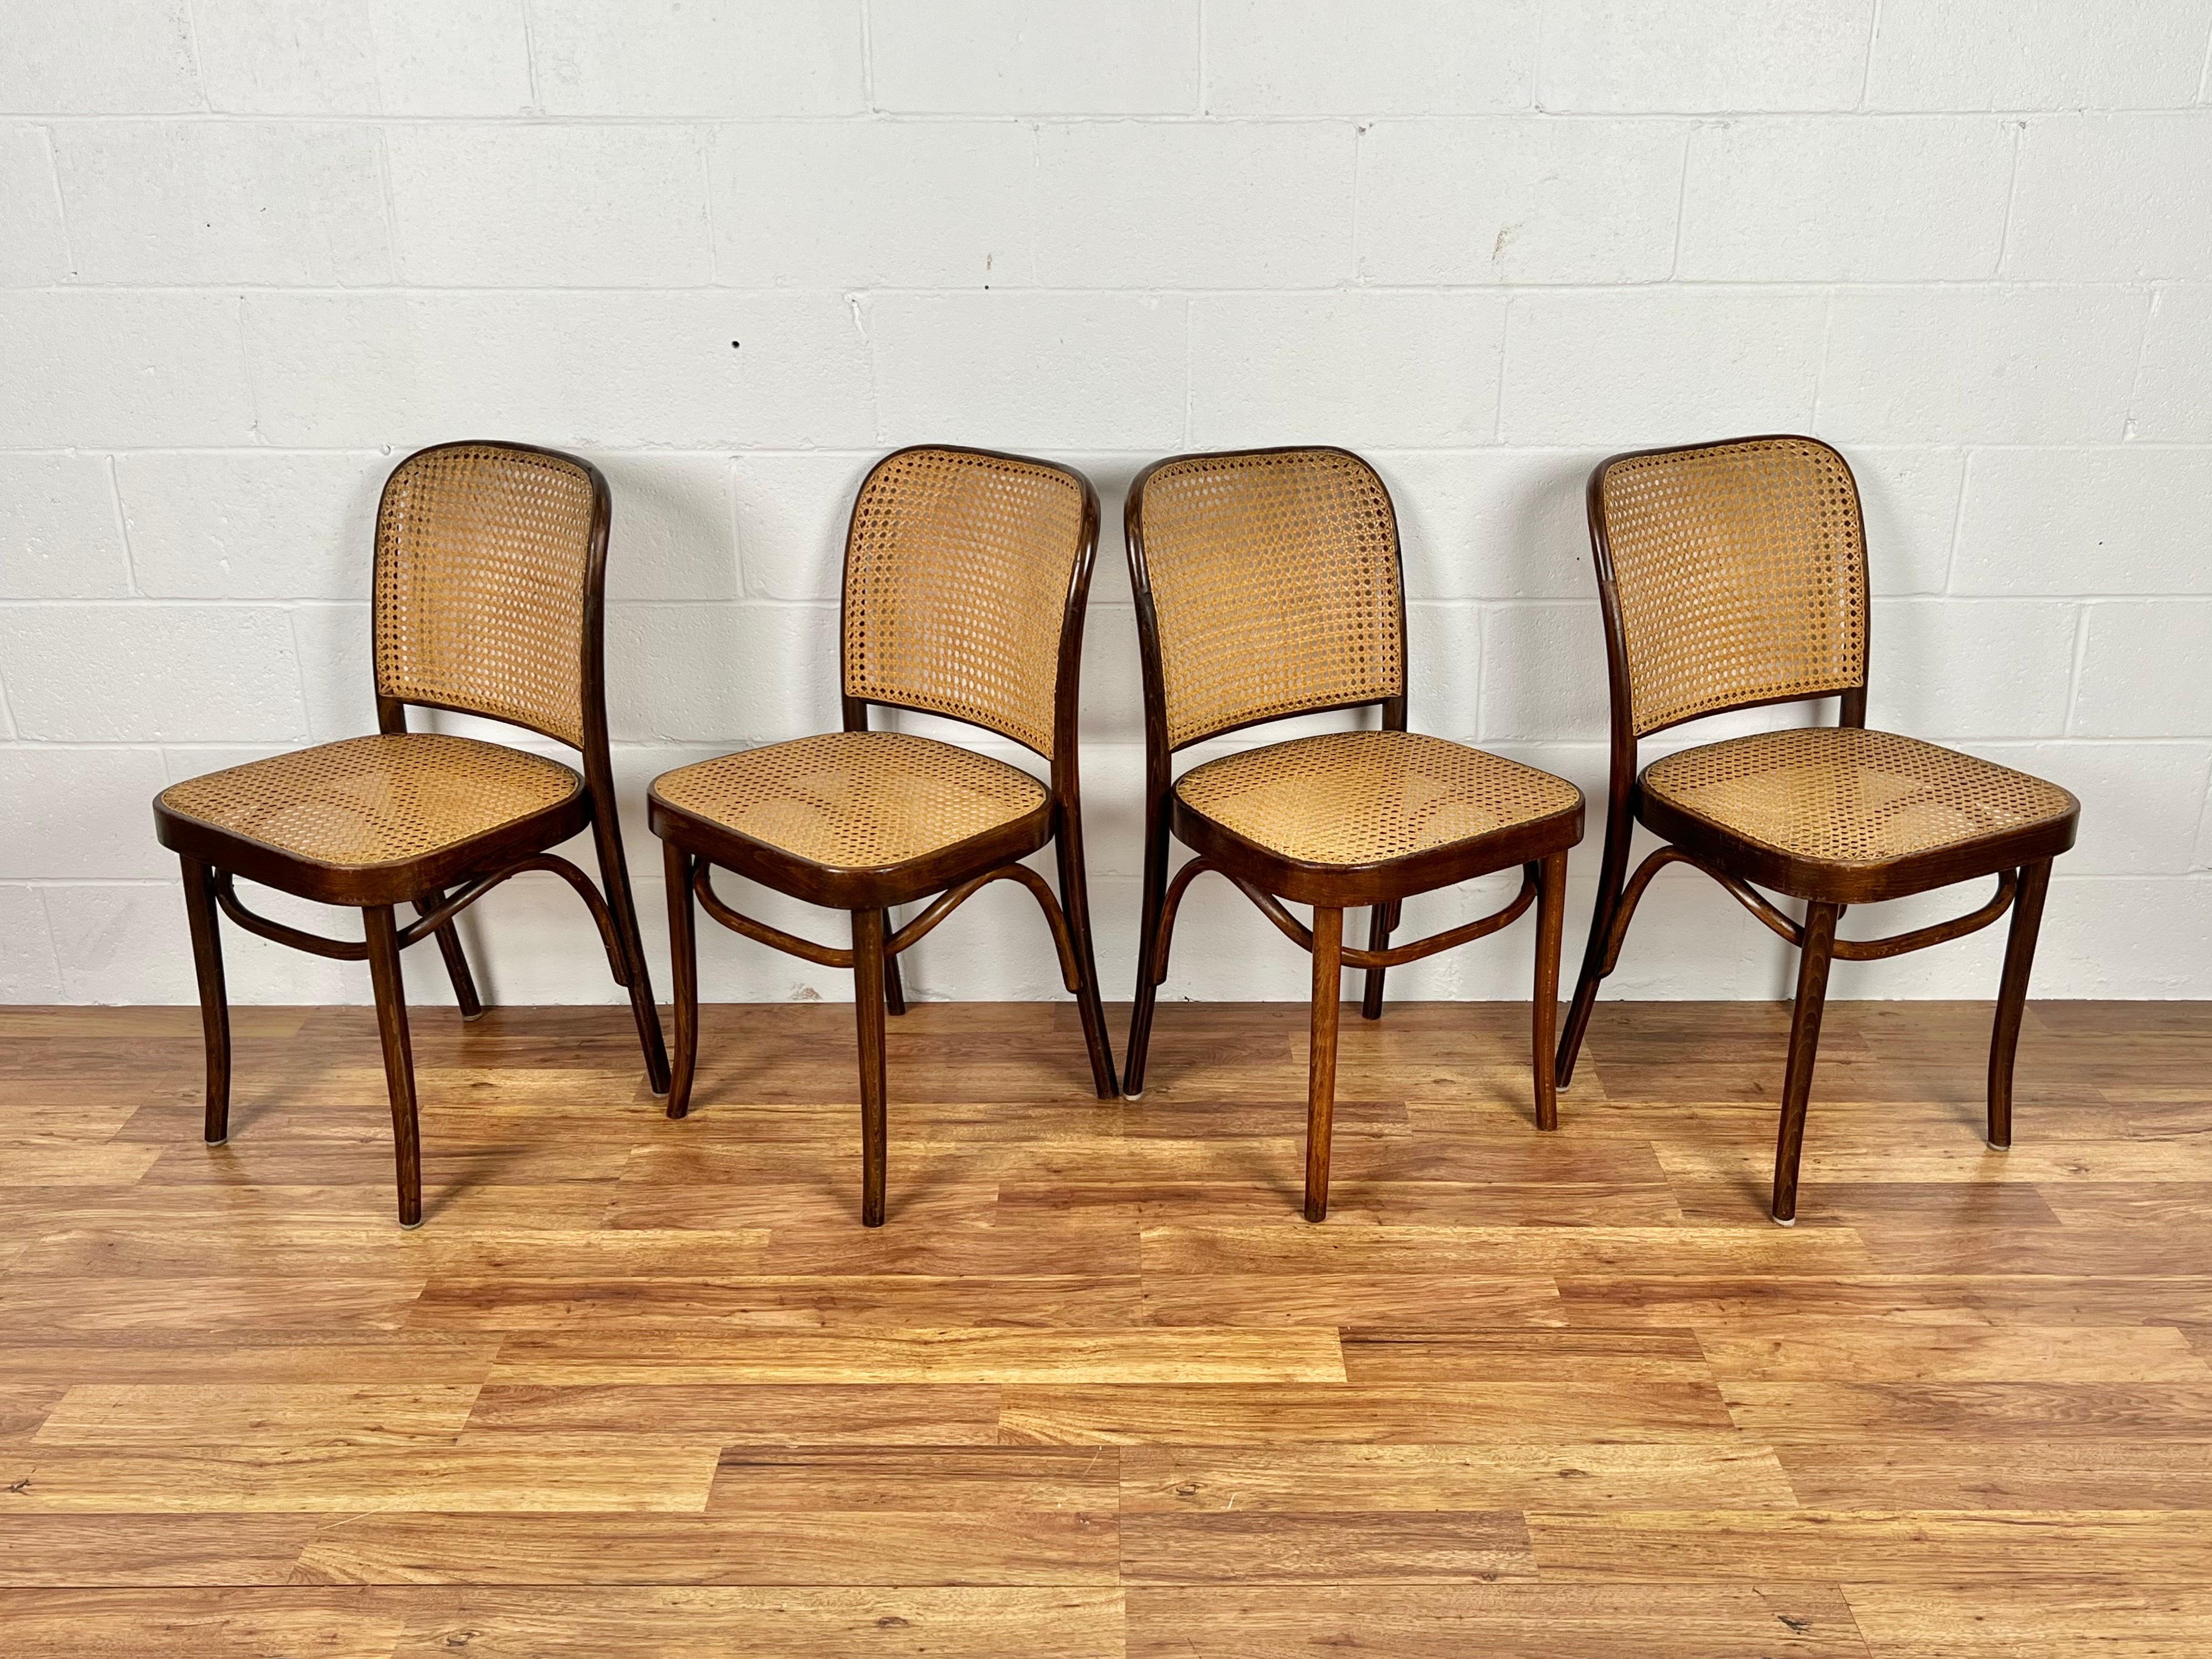 Polish 20th century Josef Hoffmann bentwood hand caned FMG Prague chairs made in Poland